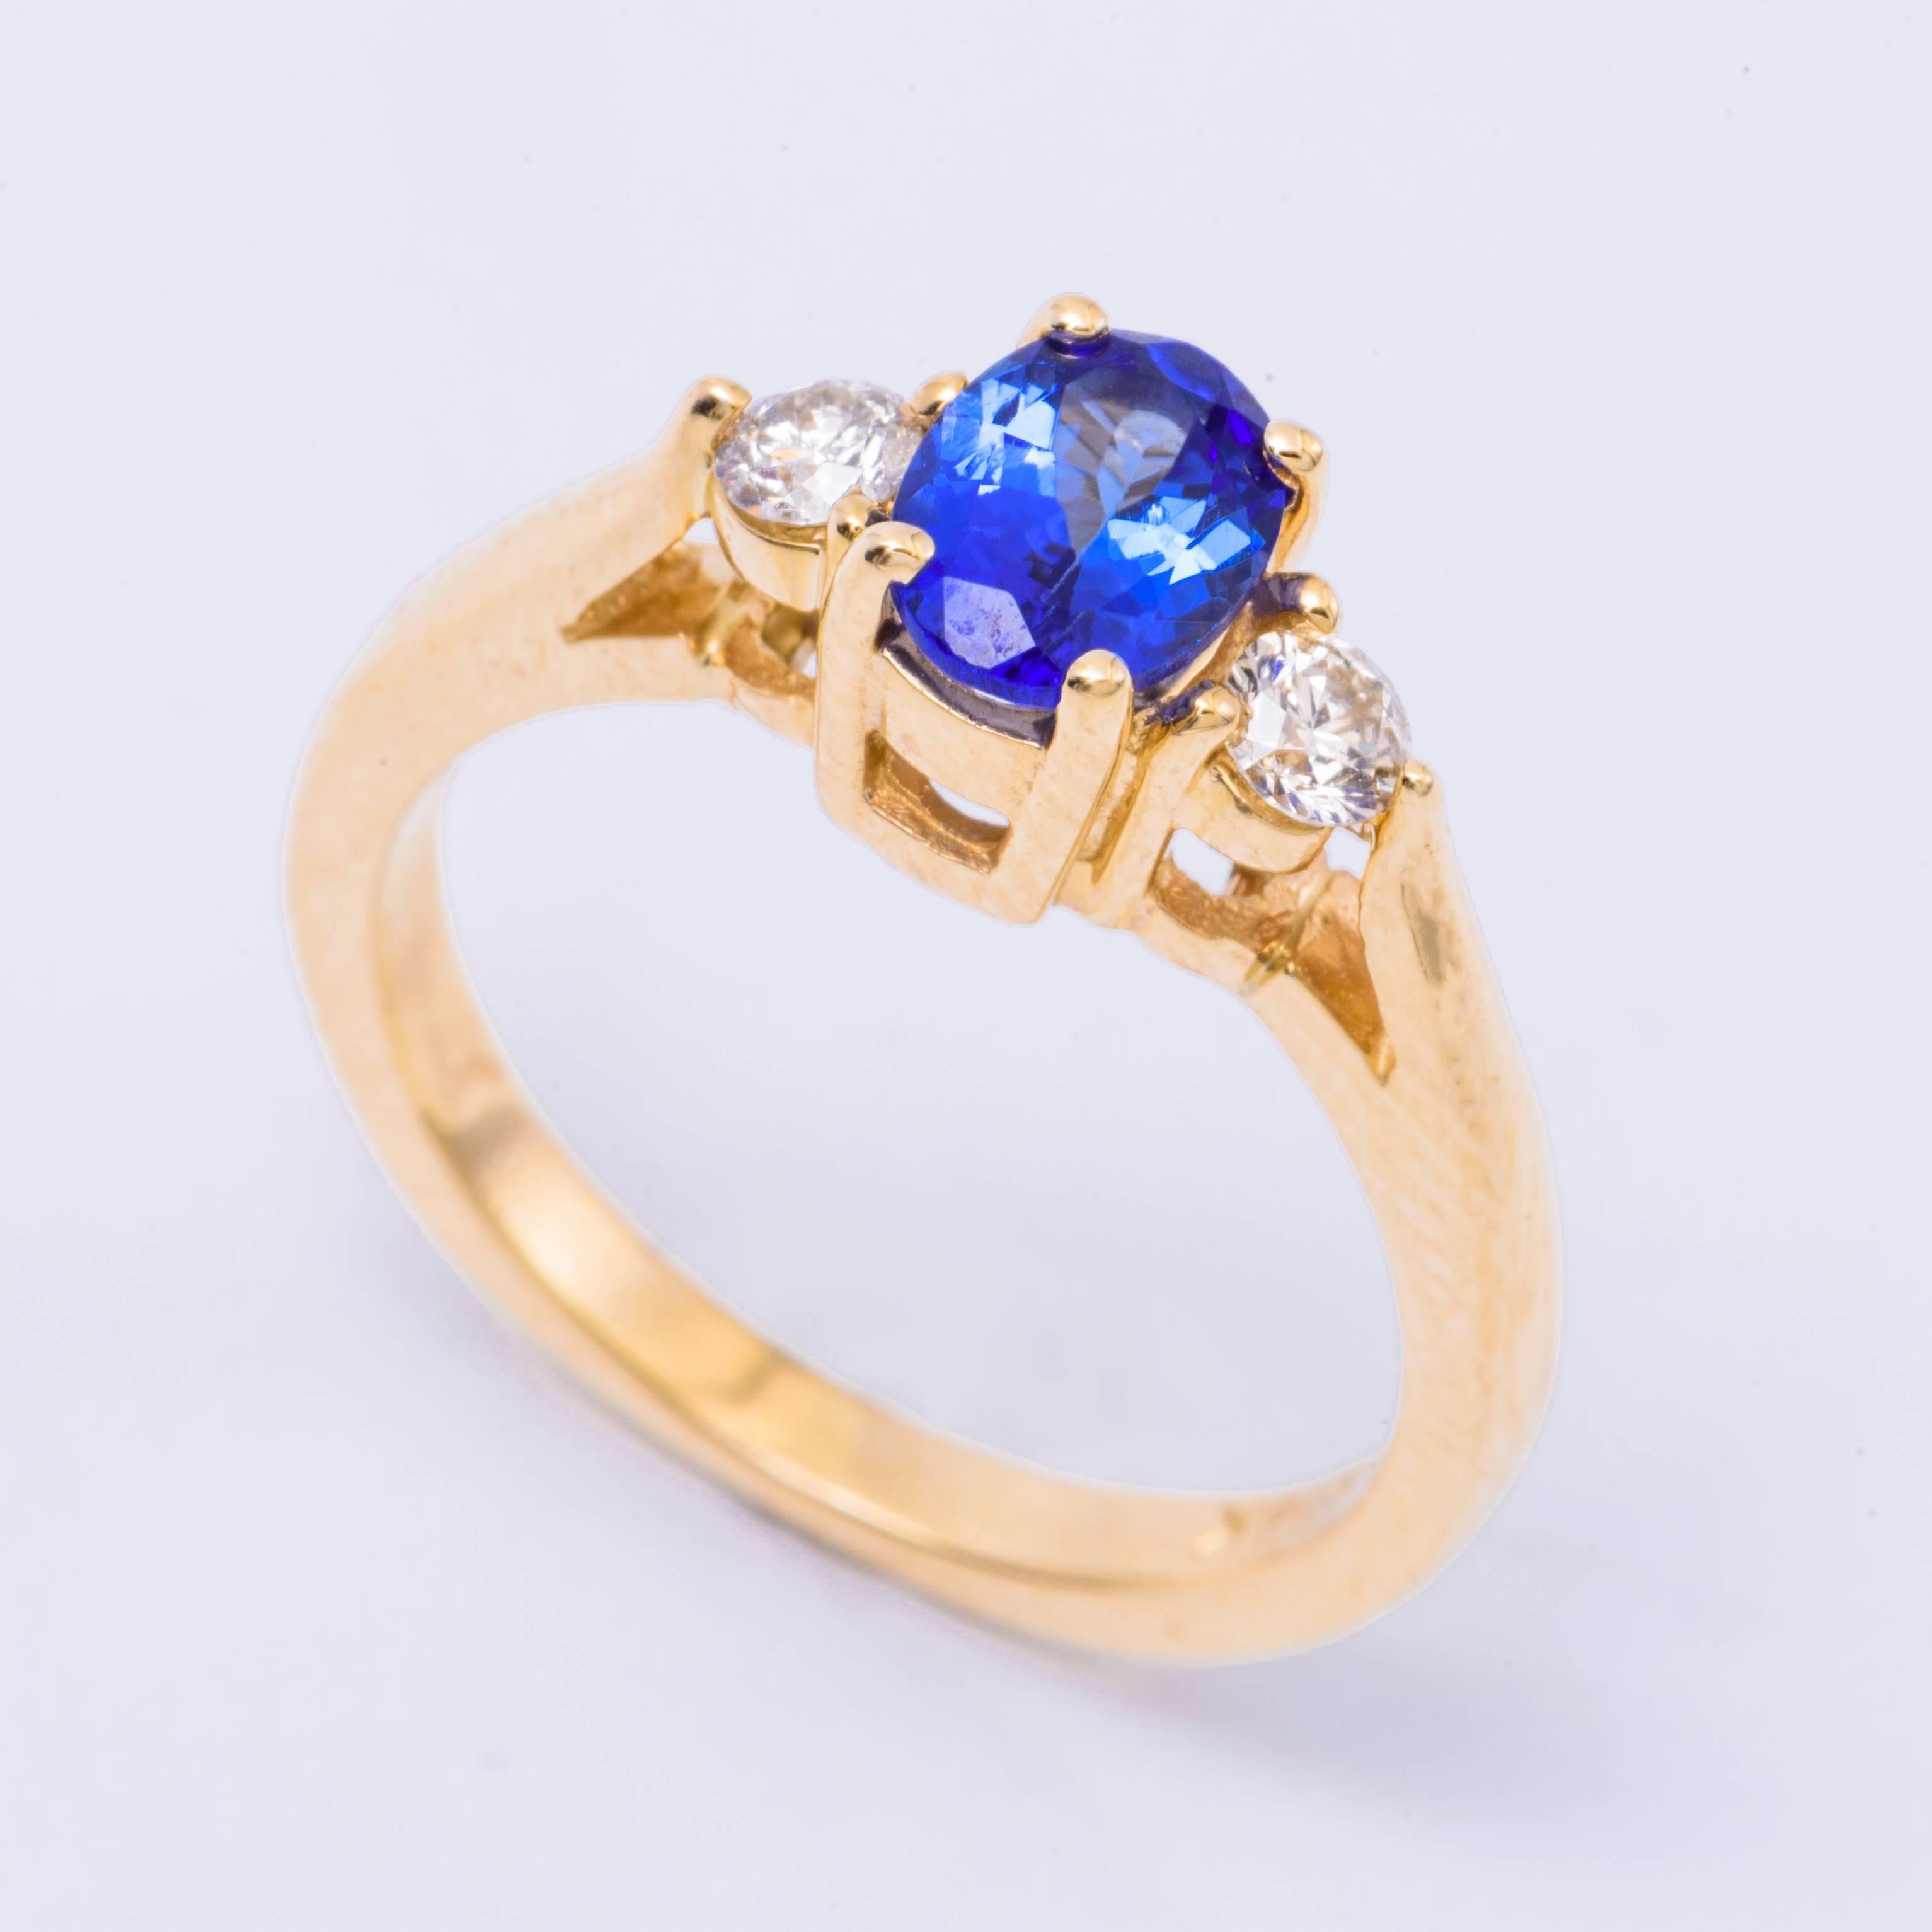 14K yellow gold with a 6X4 mm Tanzanite 0.77 Cts.
Diamond Weight: 0.22 Cts.